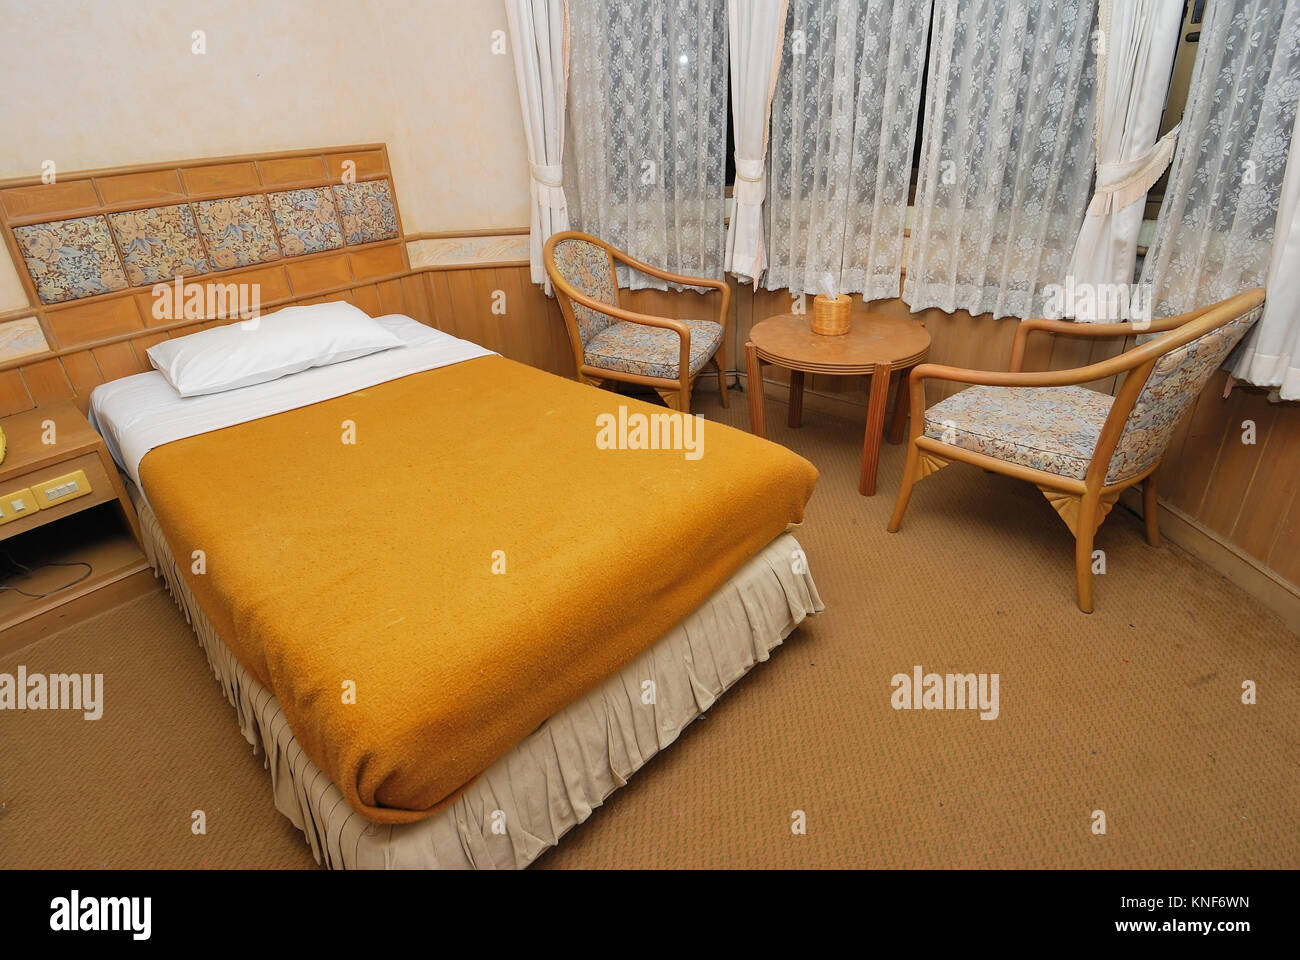 Single bed neatly done up in a high class hotel room with table and chairs. Suitable for concepts such as travel, tourism, vacation and holiday. Stock Photo